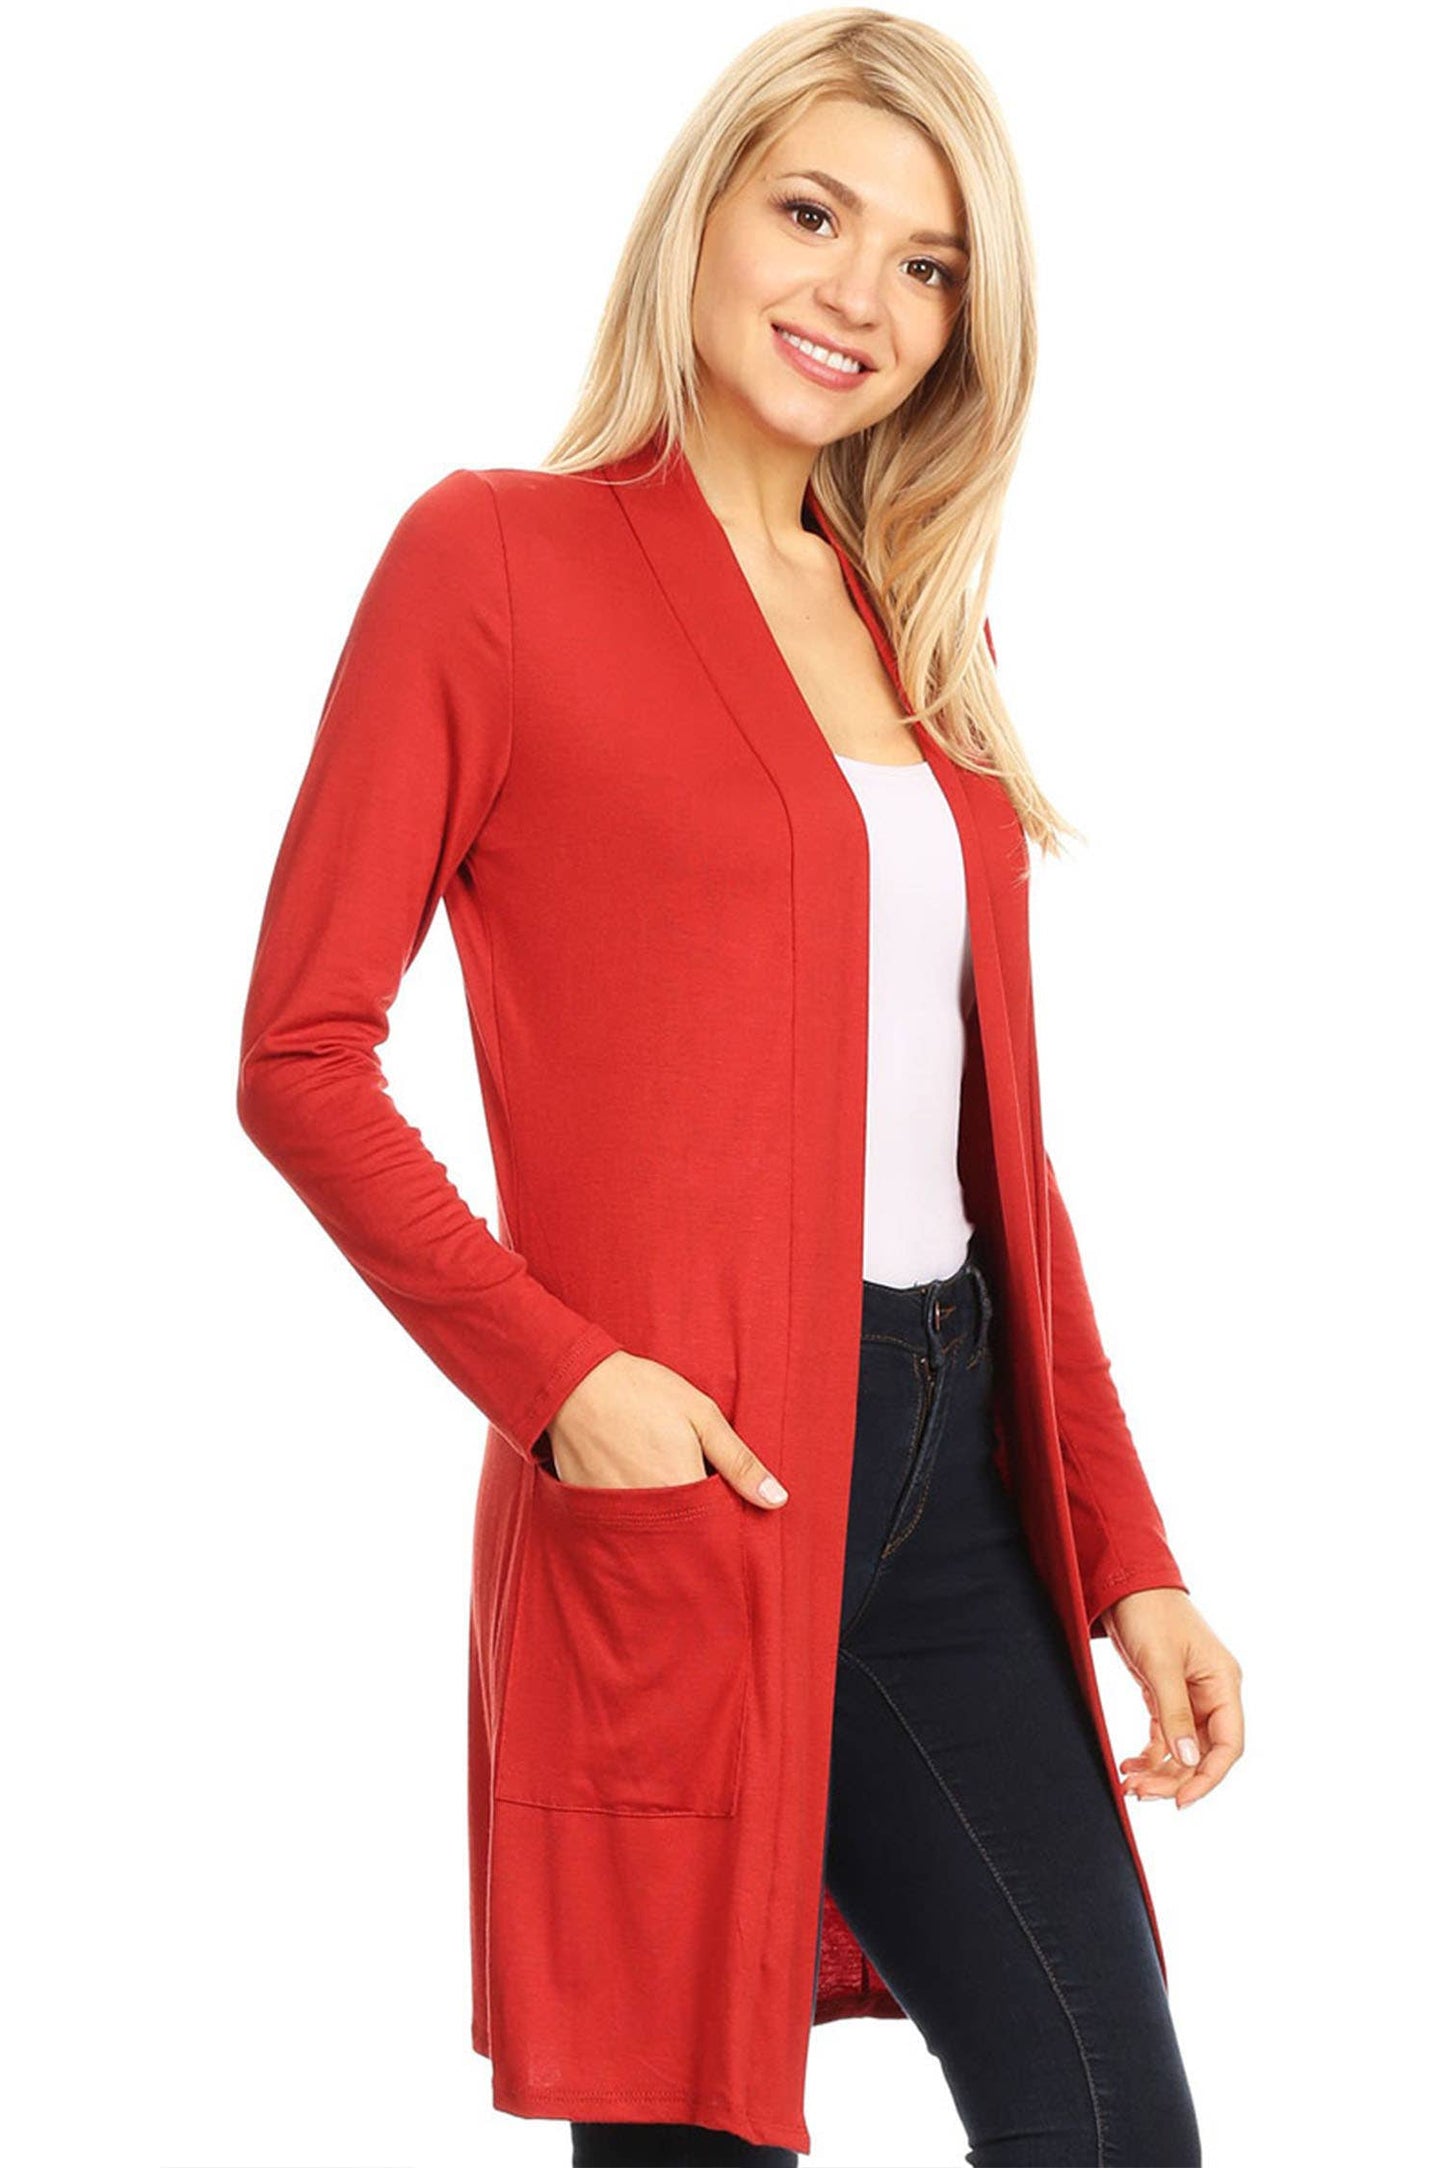 Women's Long Sleeves Side Pockets Solid Cardigan (Open Pack): Small / Plum